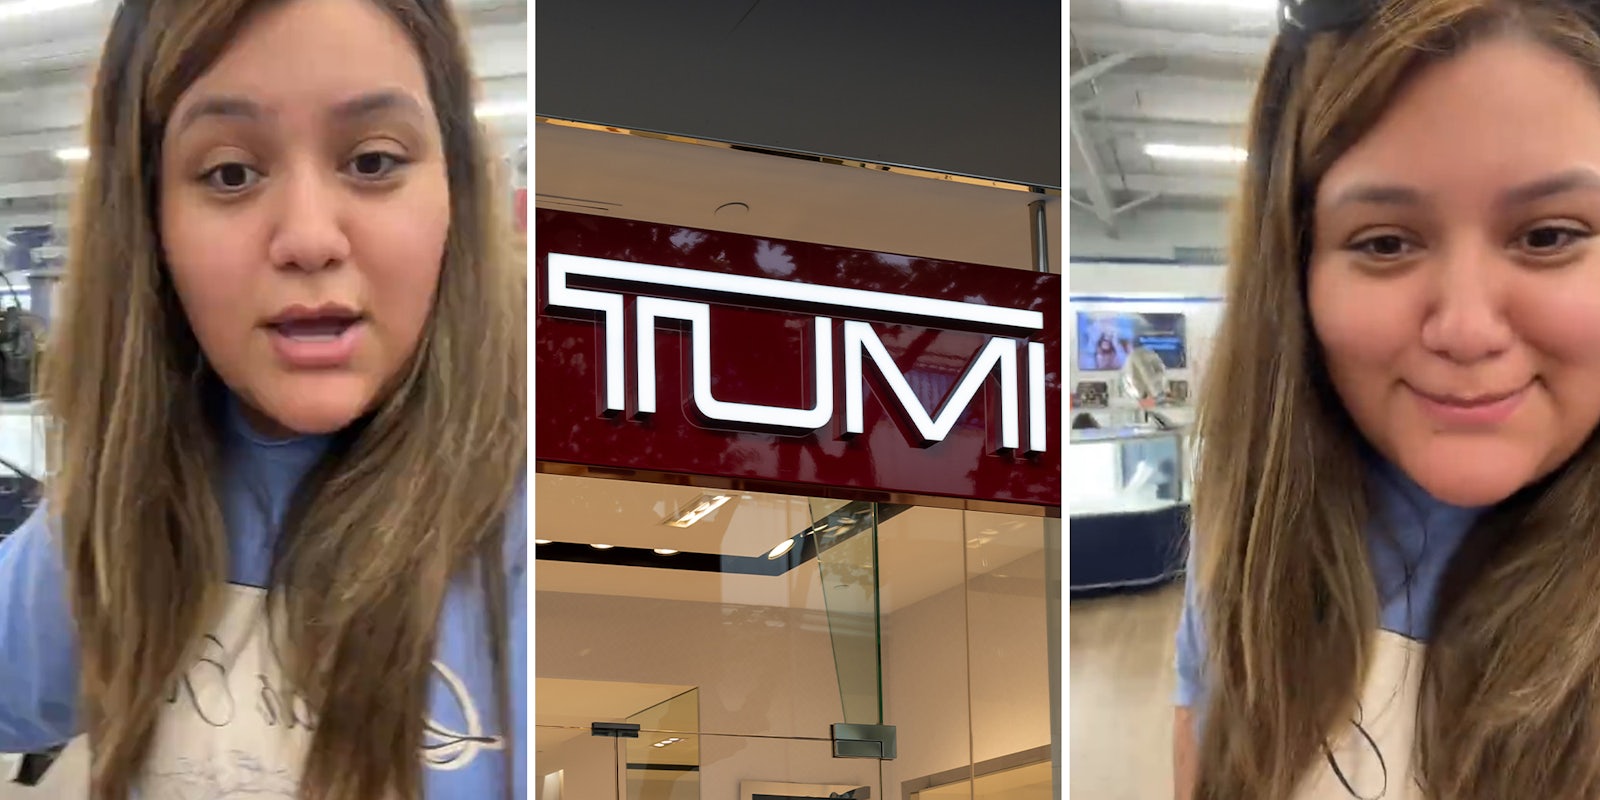 Woman attempts to buy ‘unclaimed’ airport baggage from TUMI worth $1,500